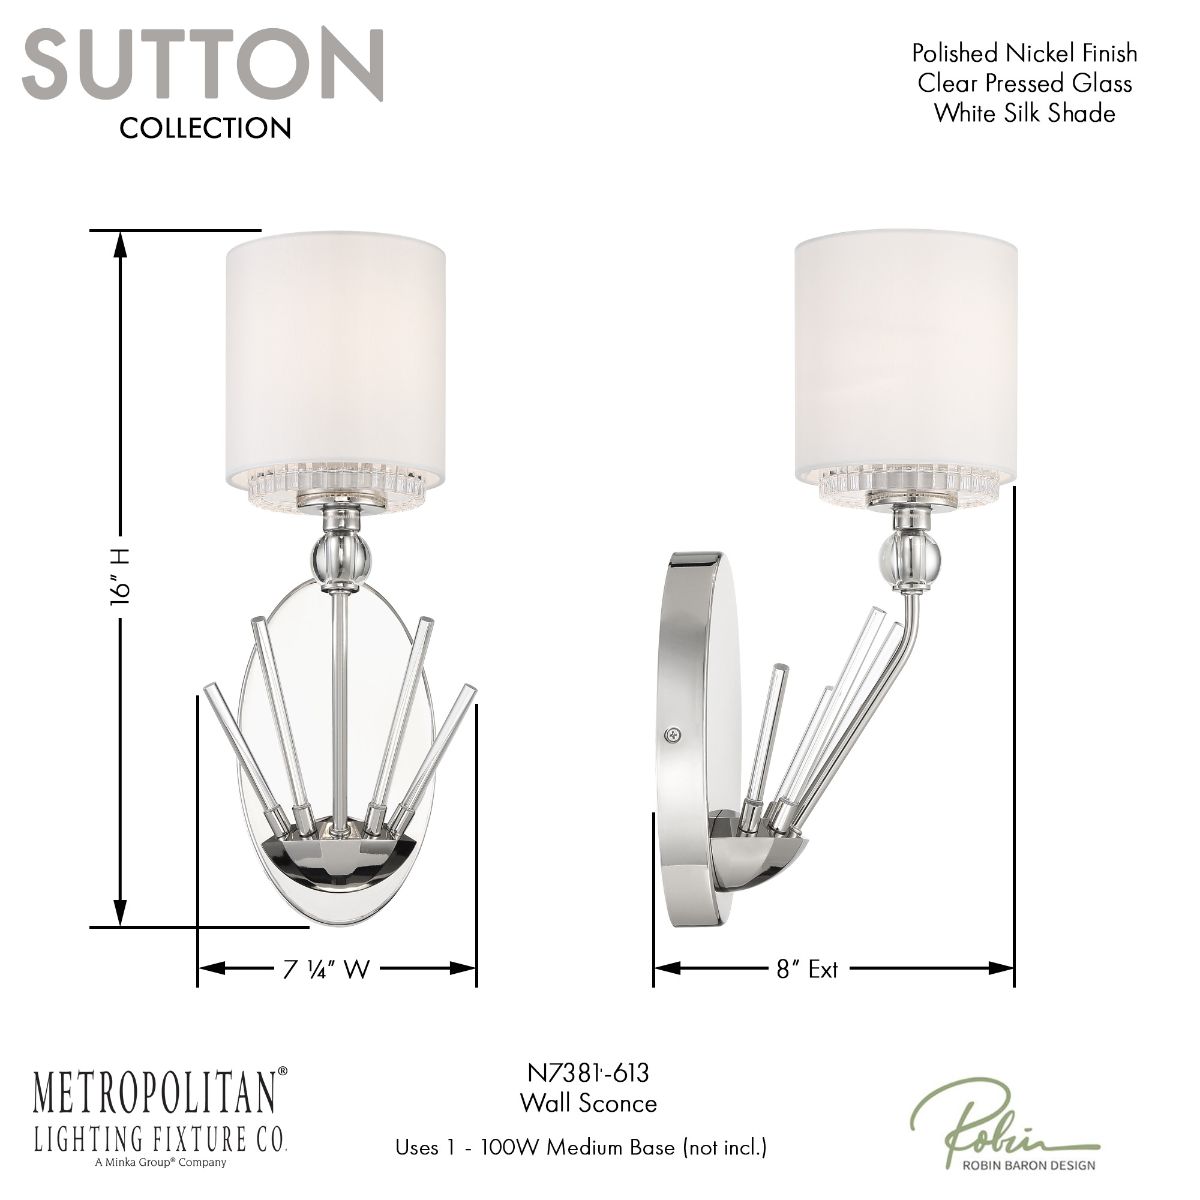 Sutton 16 in. Armed Sconce Polished Nickel Finish